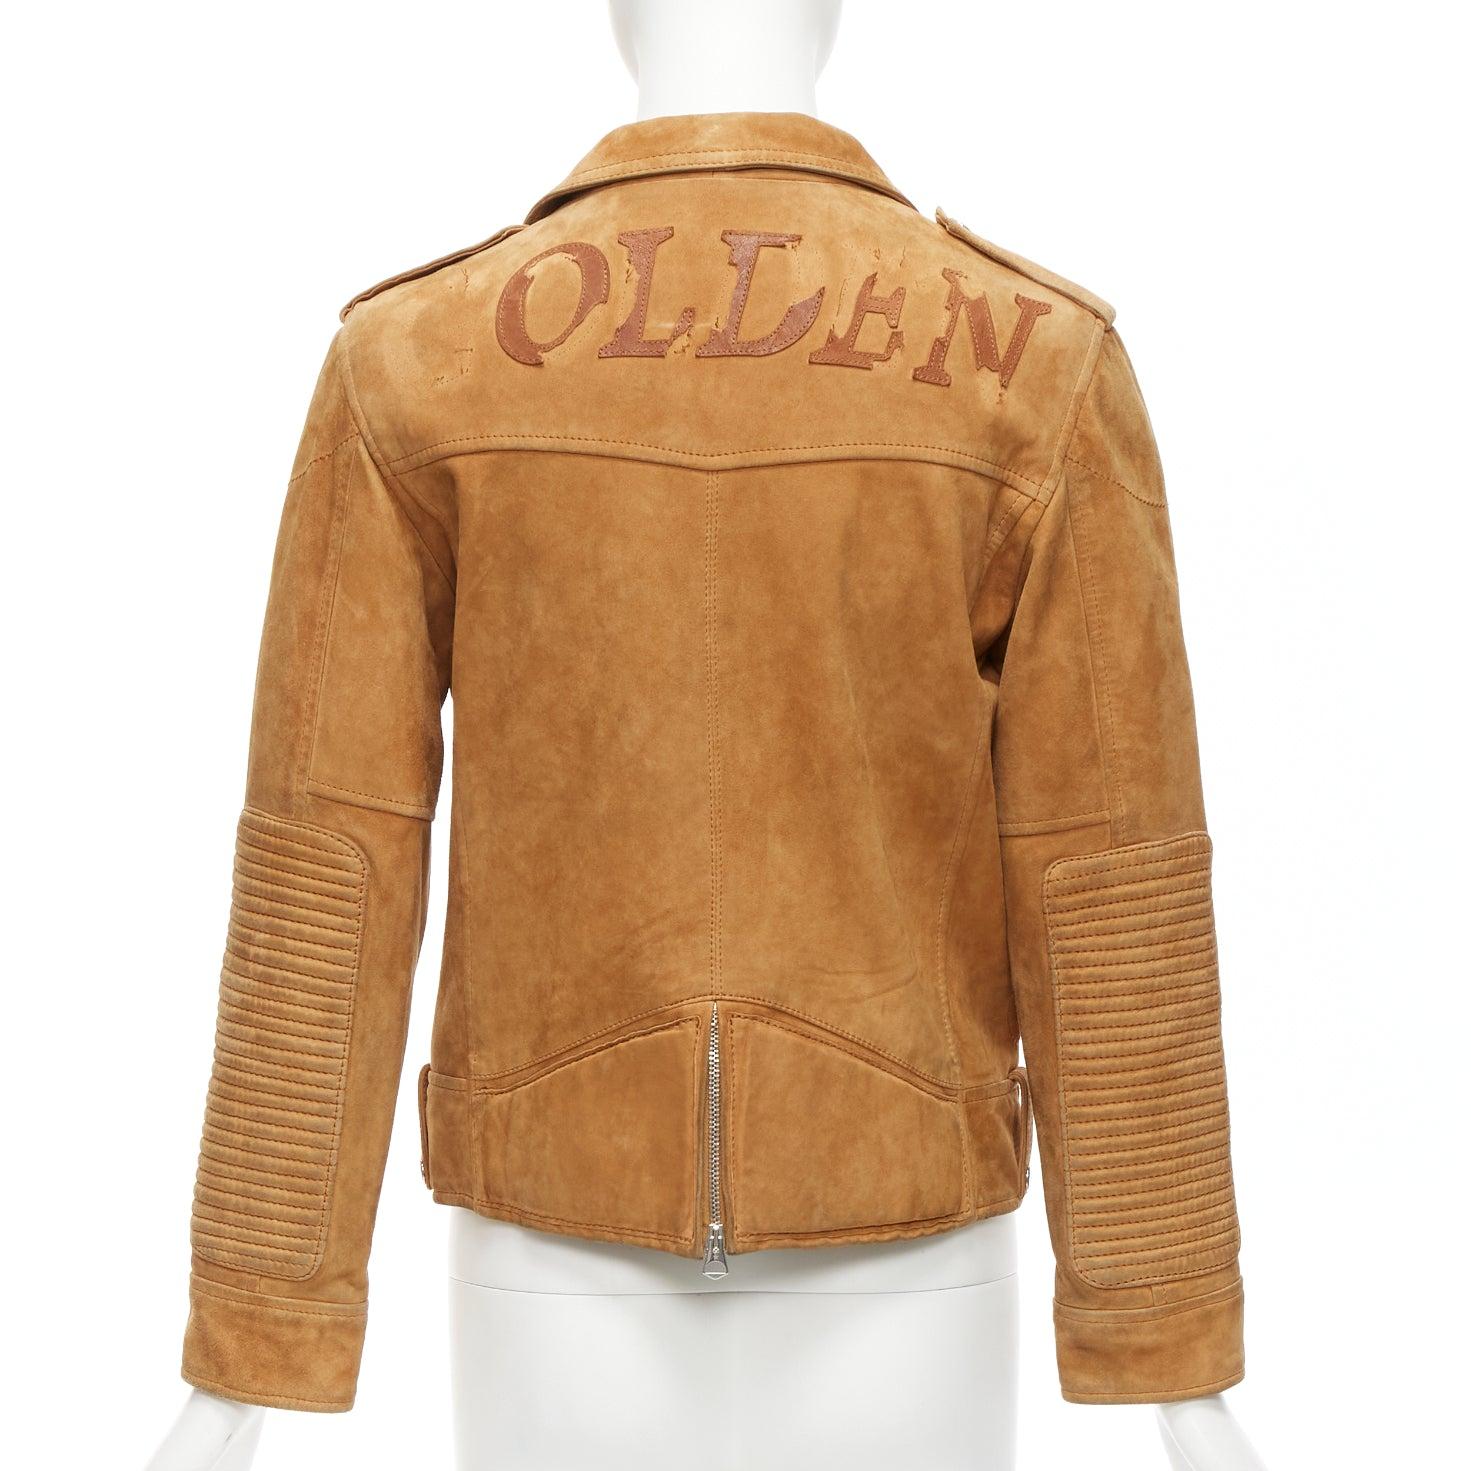 GOLDEN GOOSE tobacco brown distressed suede silver stud logo biker jacket
Reference: NKLL/A00142
Brand: Golden Goose
Material: Leather
Color: Brown, Silver
Pattern: Solid
Closure: Zip
Lining: Grey Fabric
Extra Details: GOLDEN leather patch at back